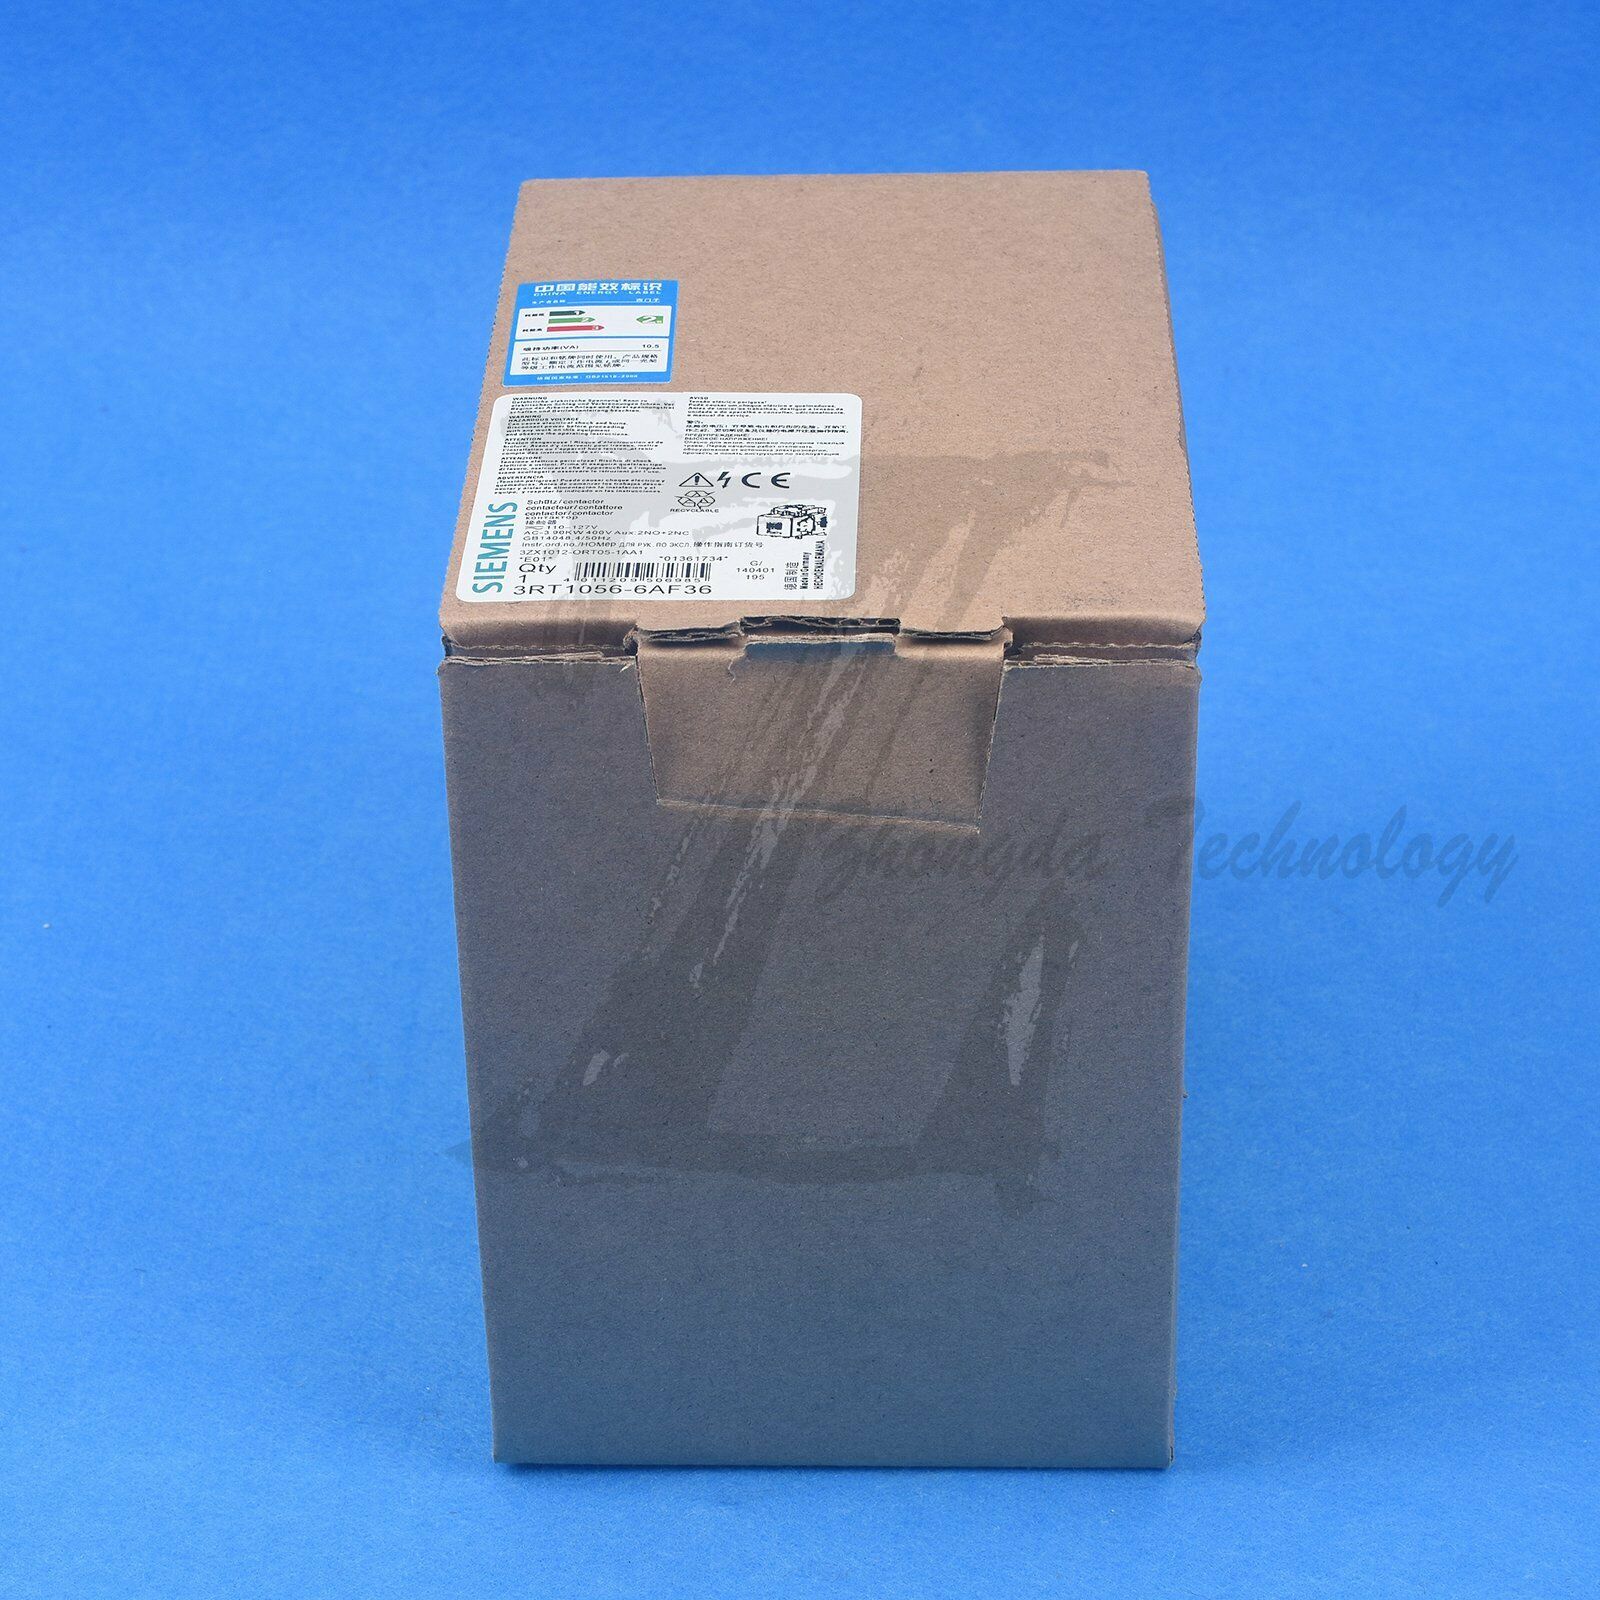 1PC New Siemens Contactor 3RT1056-6AF36 3RT10566AF36 One year warranty KOEED 101-200, 90%, import_2020_10_10_031751, Other, Siemens